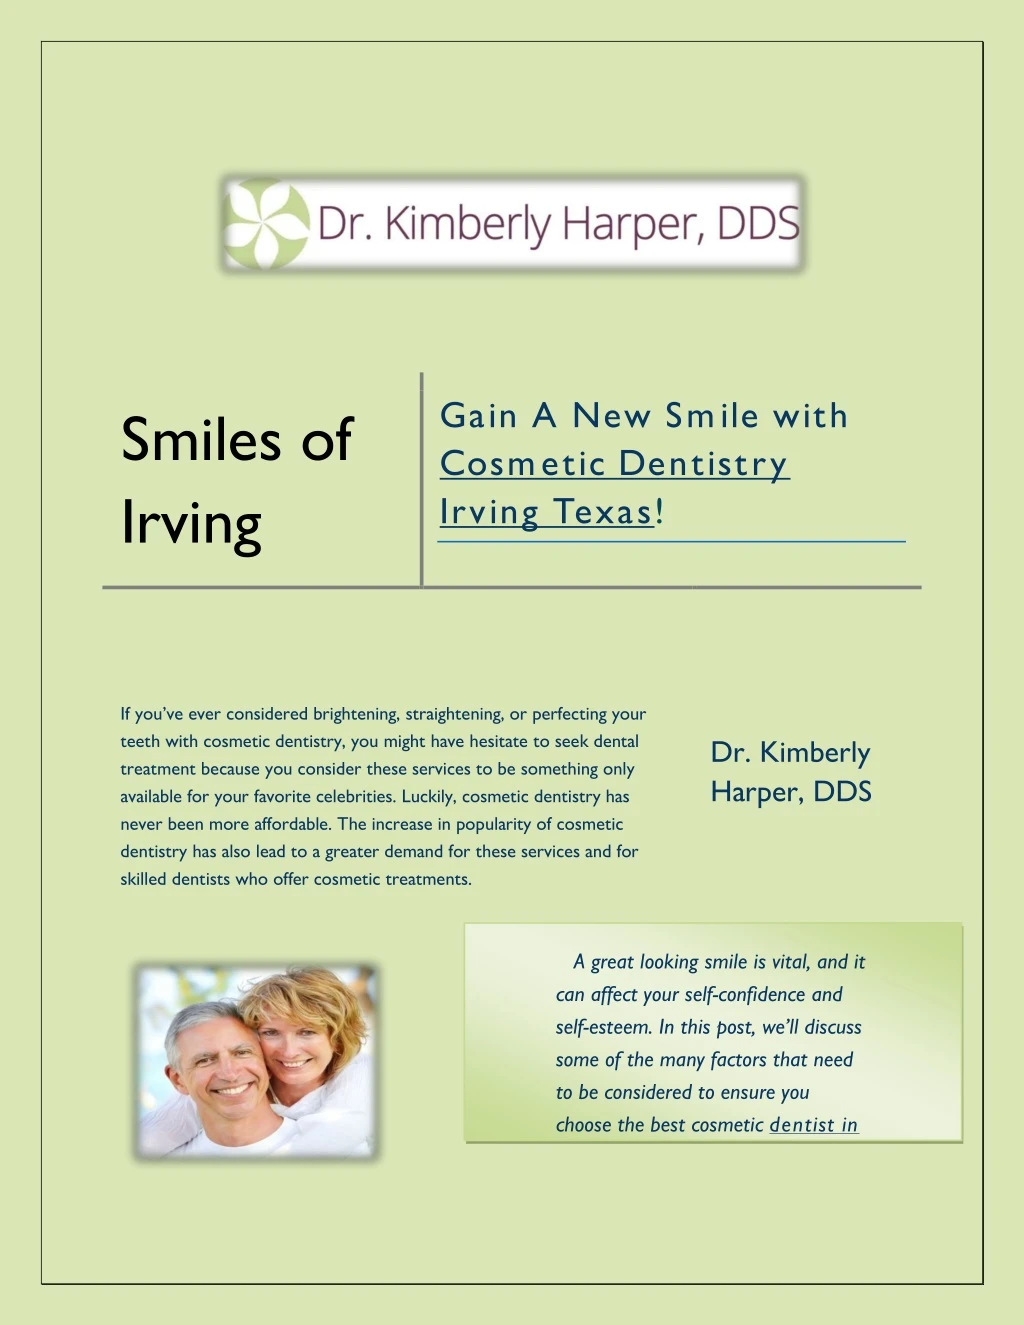 gain a new smile with cosmetic dentistry irving